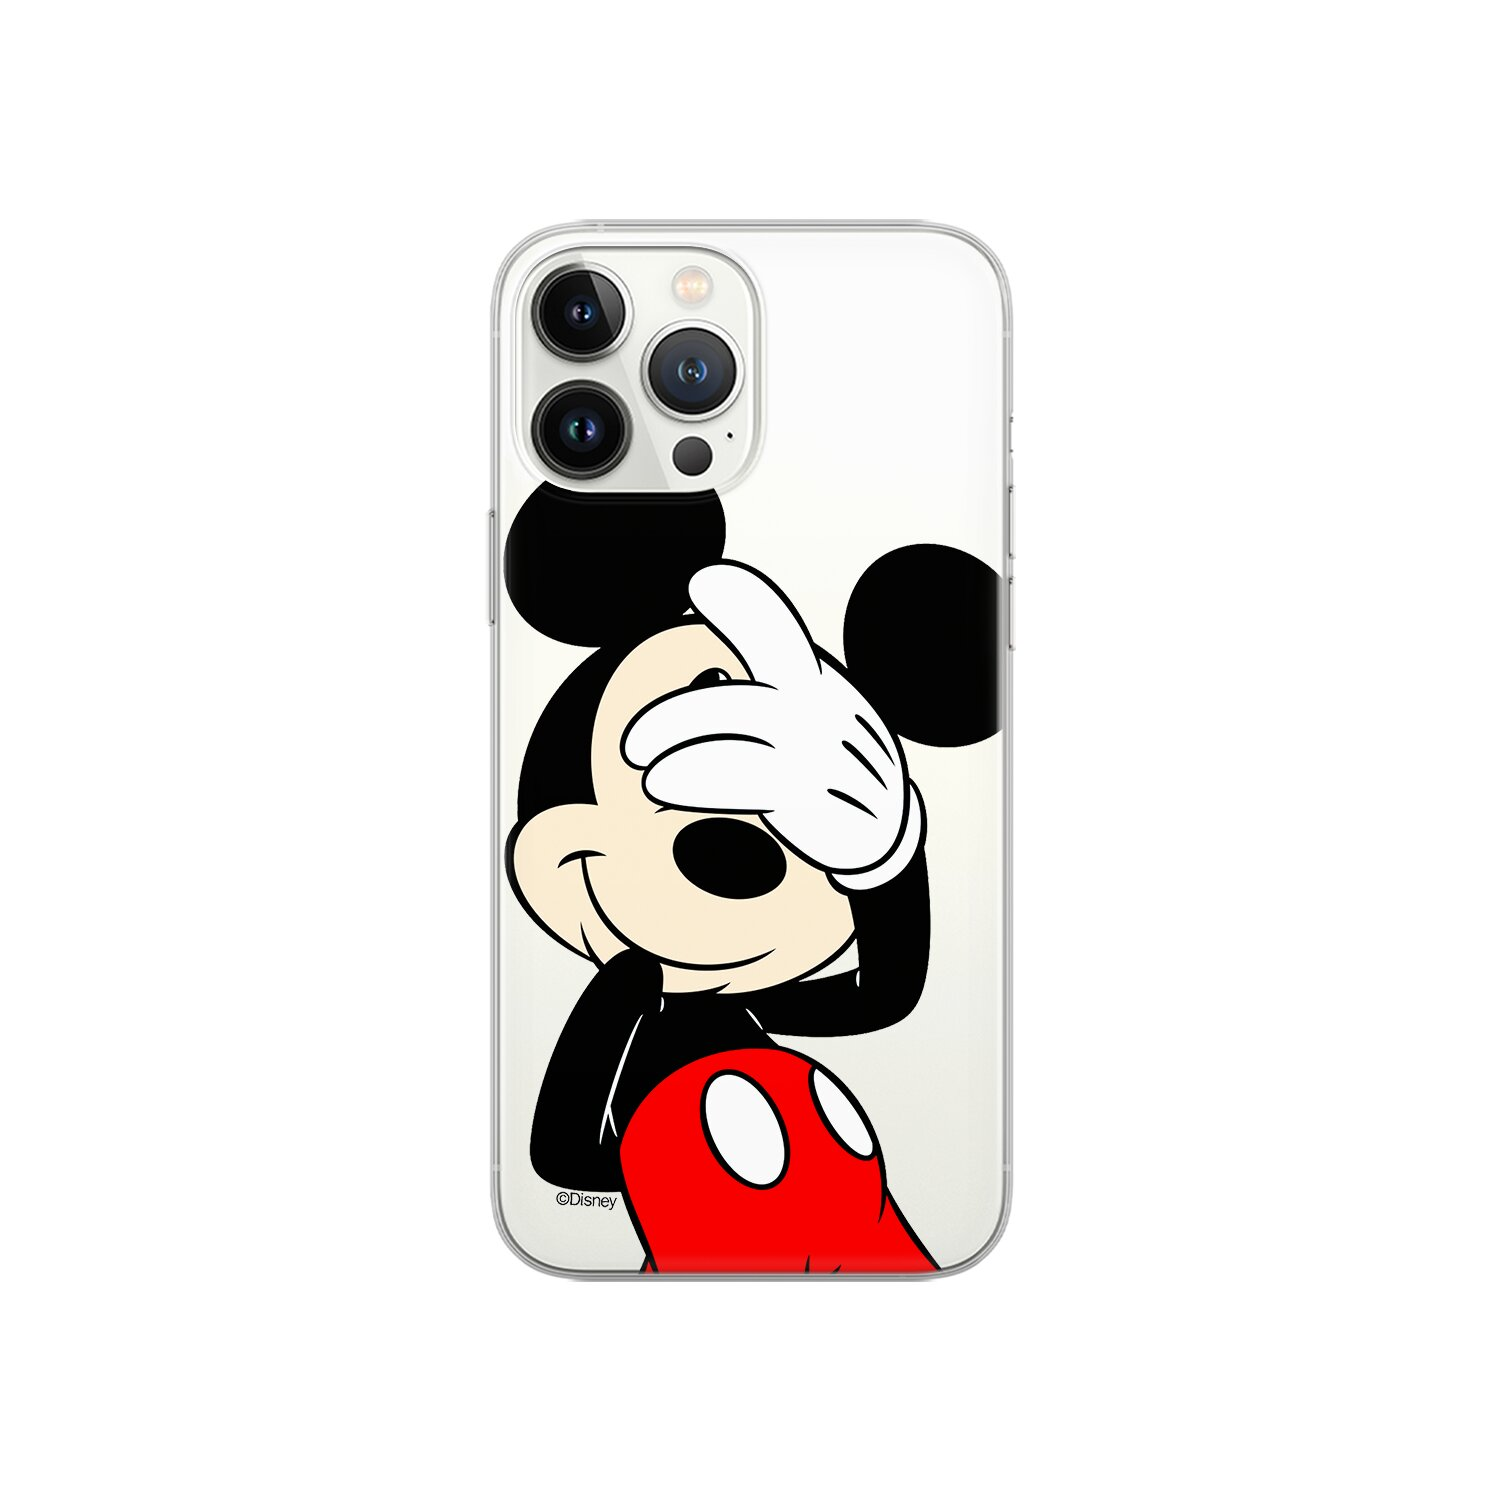 Pro 15 Max, Backcover, iPhone DISNEY Print, Apple, Partial Mickey Transparent 003